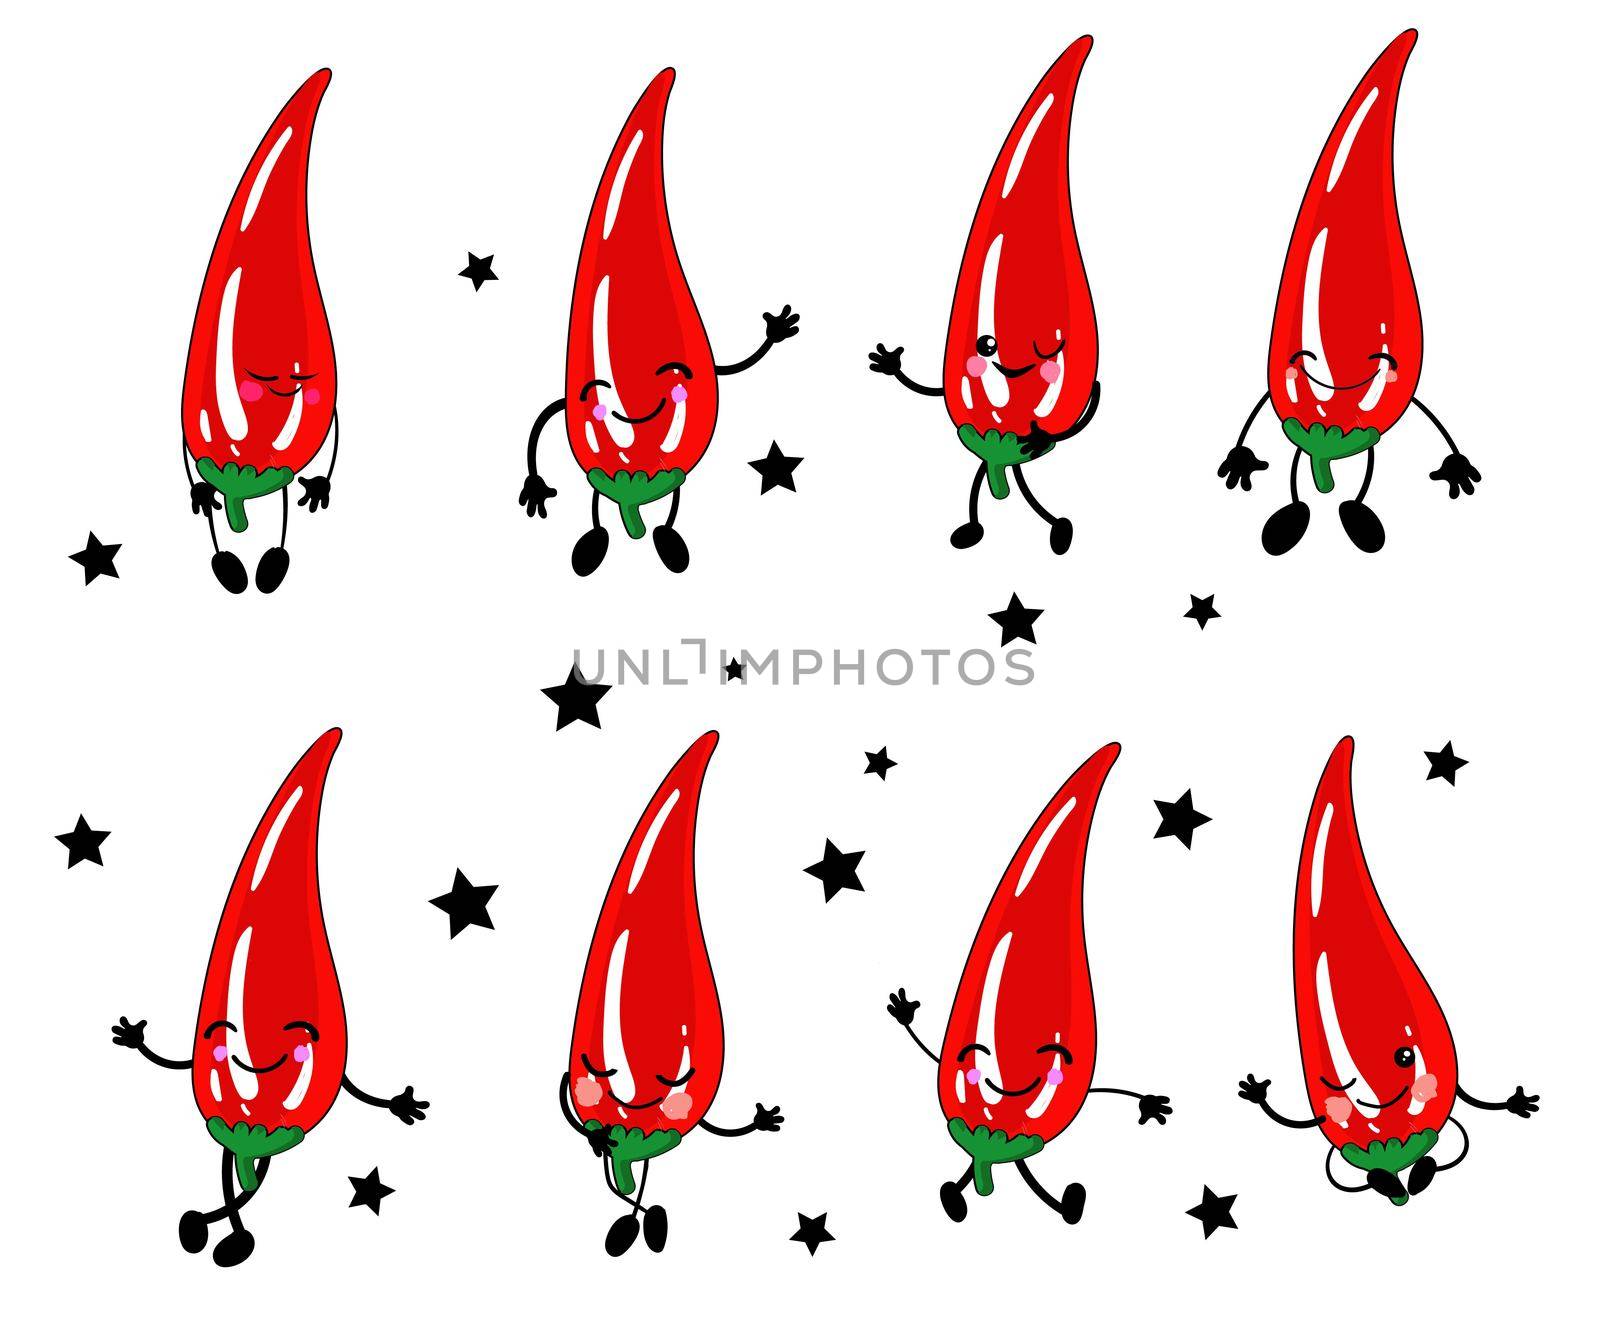 Chilli. Hot pepper jalapeno character. Cute cartoon lackey with arms and legs. Set of vegetablesisolated on a white background.